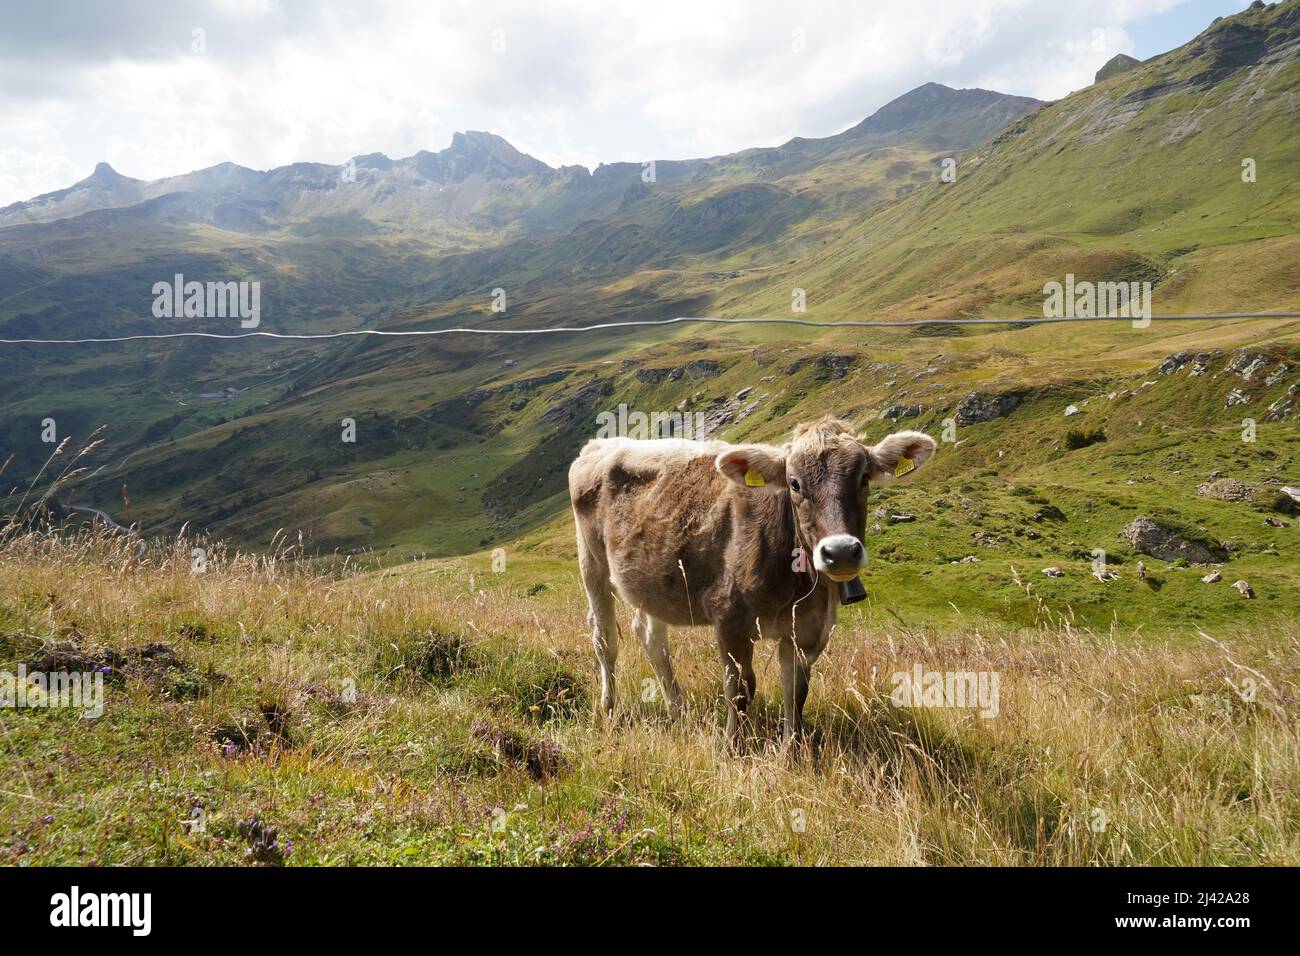 Cow of breed Swiss brown grazing alpine meadow in Switzerland. In the foreground there is a metal wire to prevent it to escape. Stock Photo